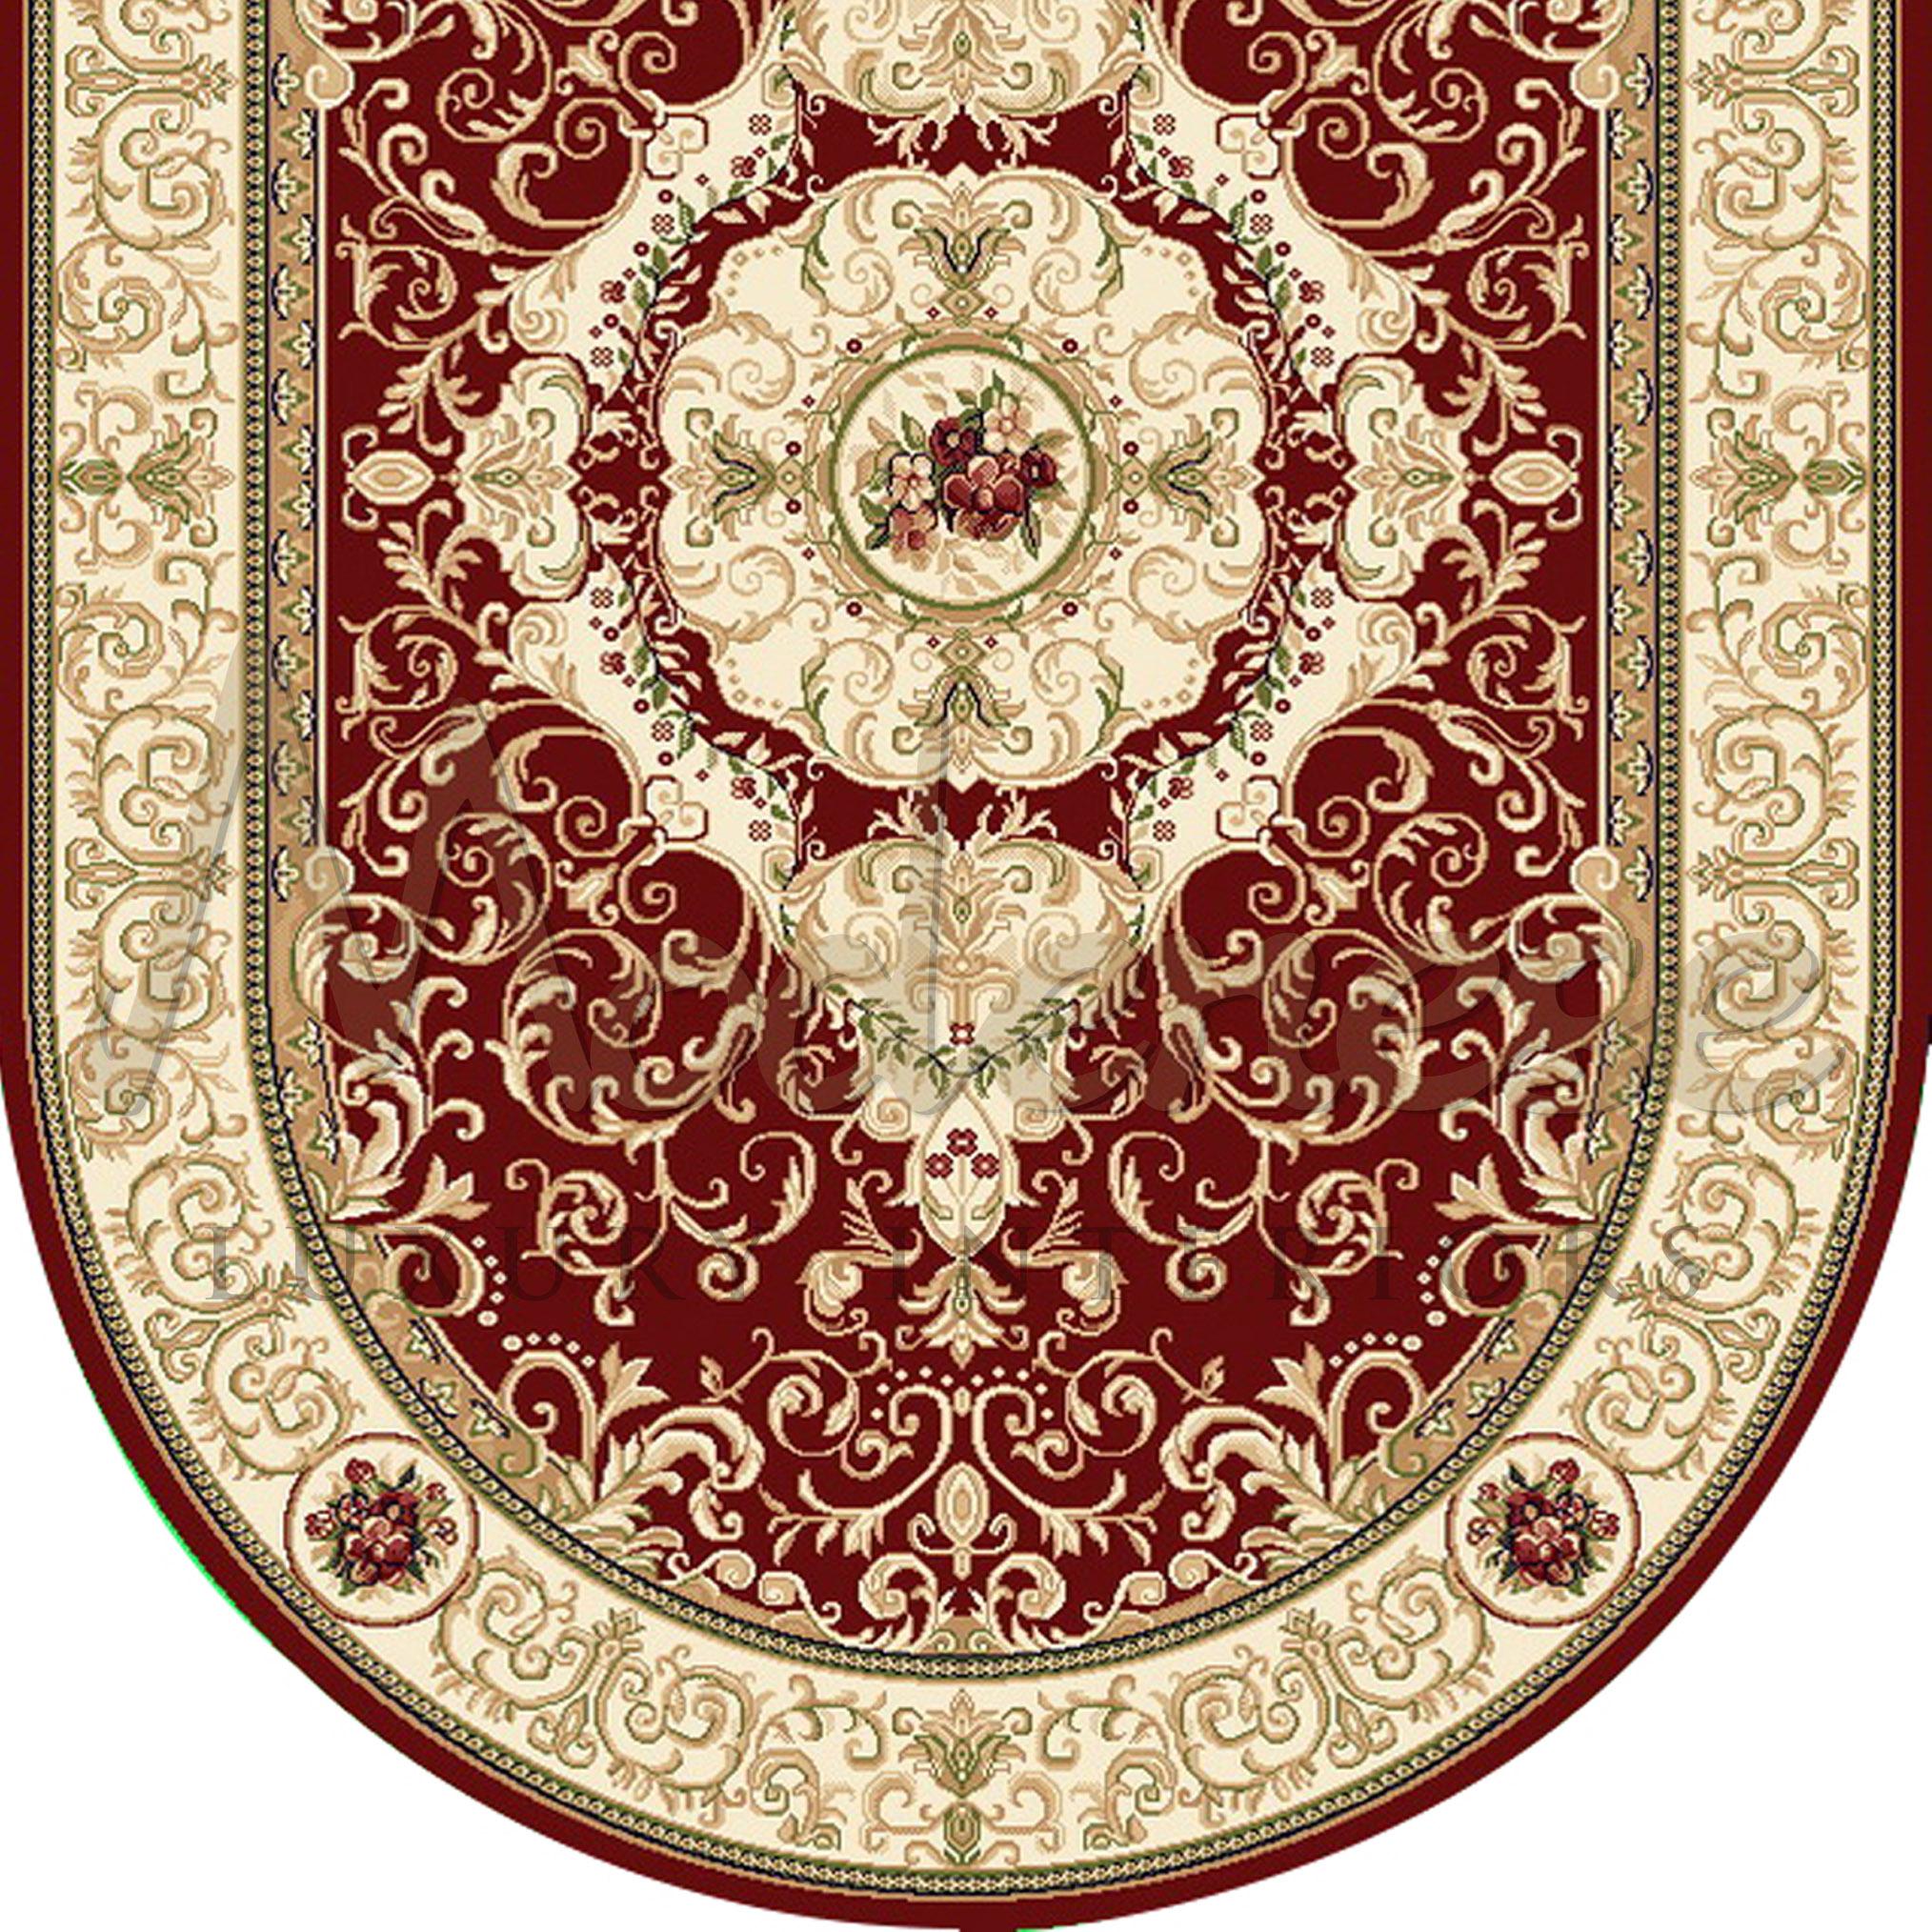 Hand-Crafted 21st Century Handknotted Oval Bamboo Silk Rug by Modenese Interiors, Scarlet For Sale